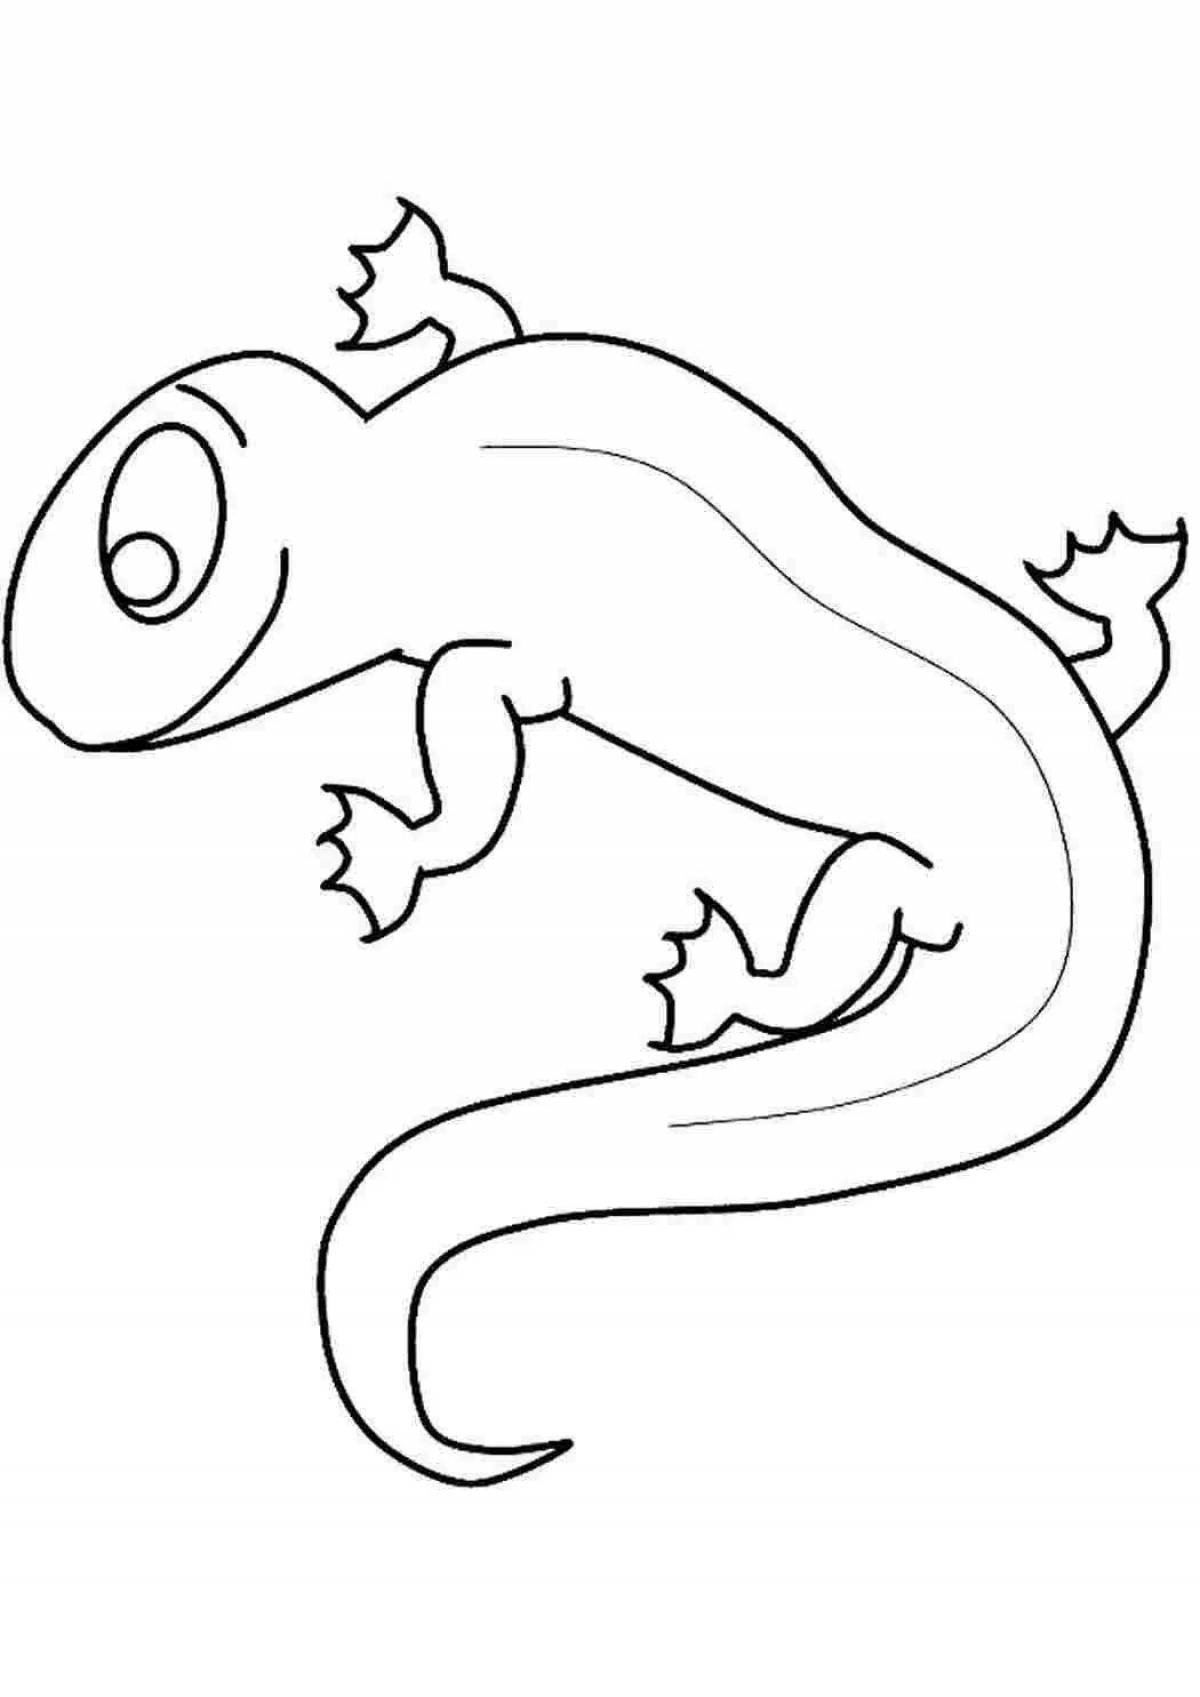 Funny lizard coloring book for kids